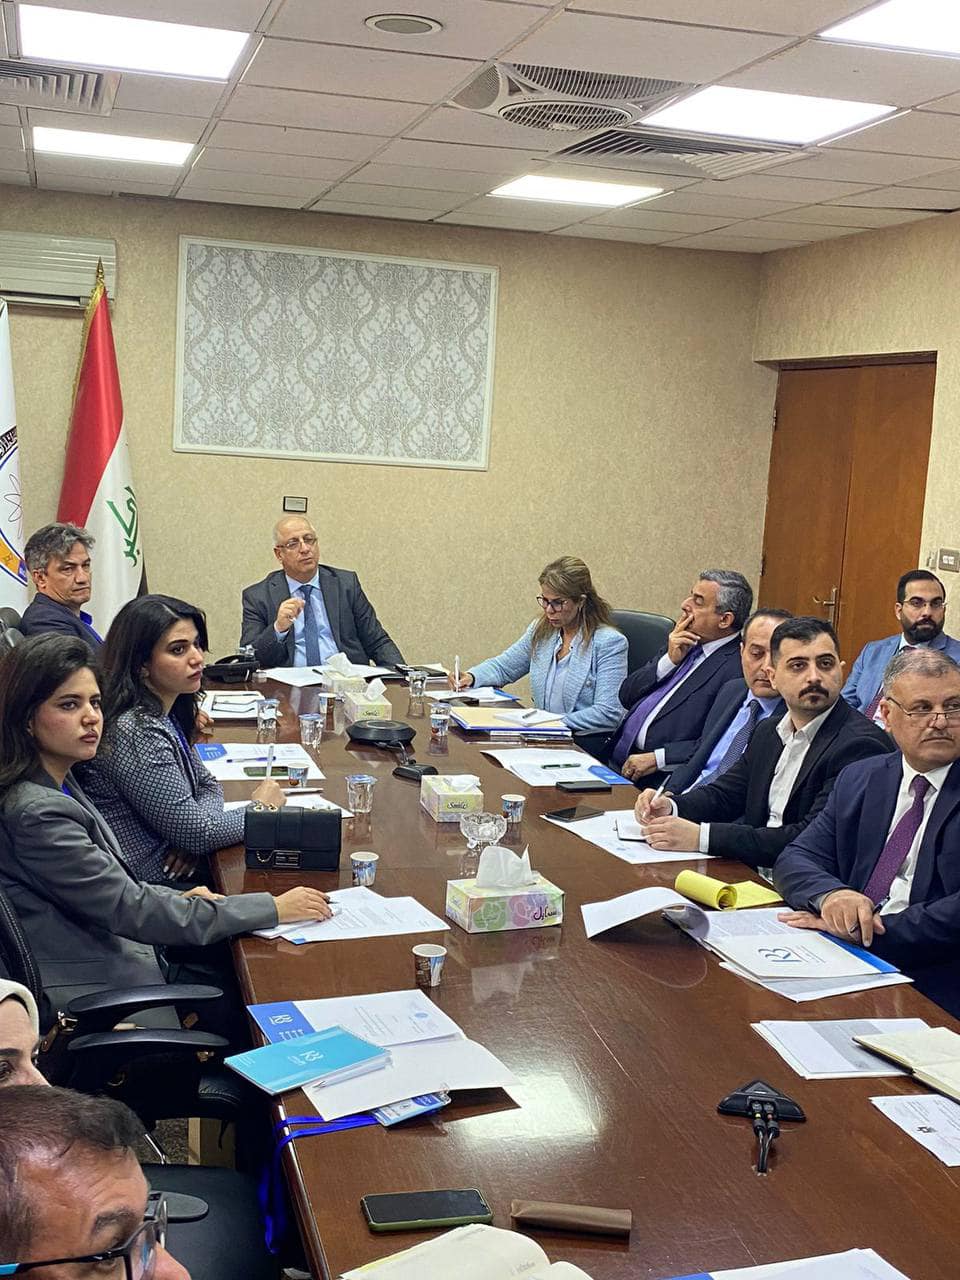 In the presence of staff members from the Baghdad Center for Public Policy, represented by the team responsible for preparing the national human development report.